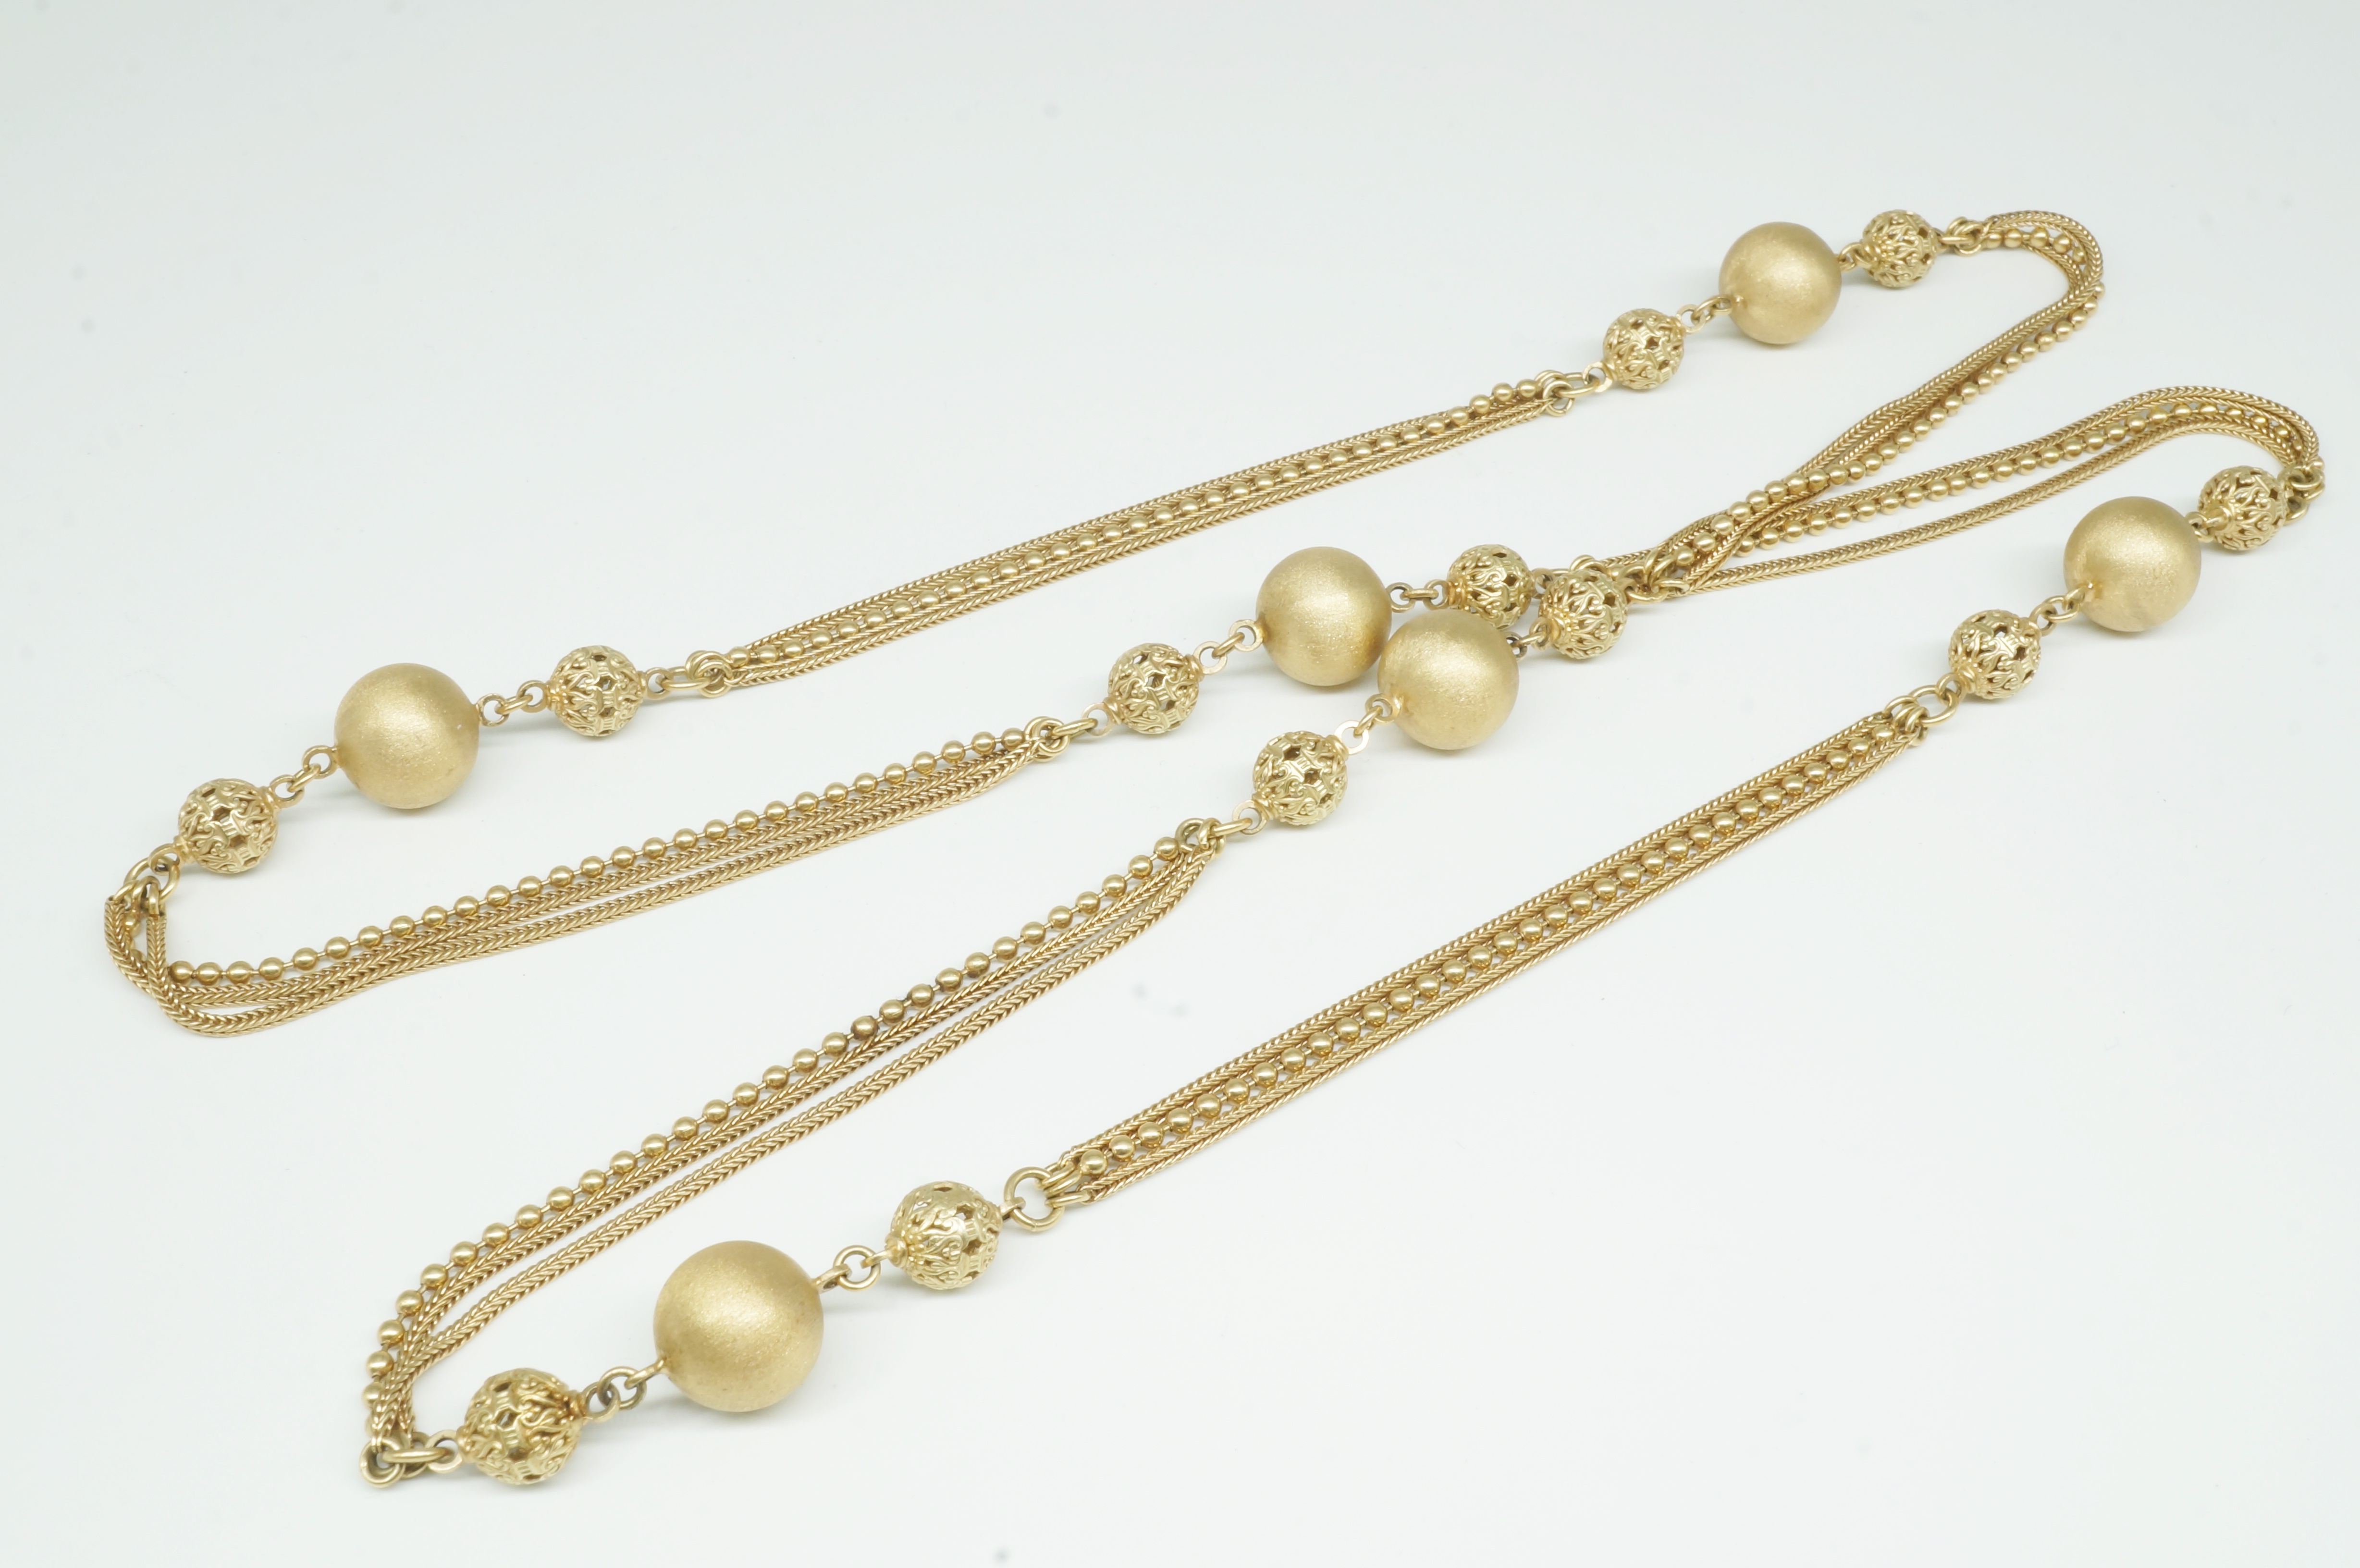 '14ct Yellow Gold Necklace, Tripe Chains and Triple Fancy Balls '